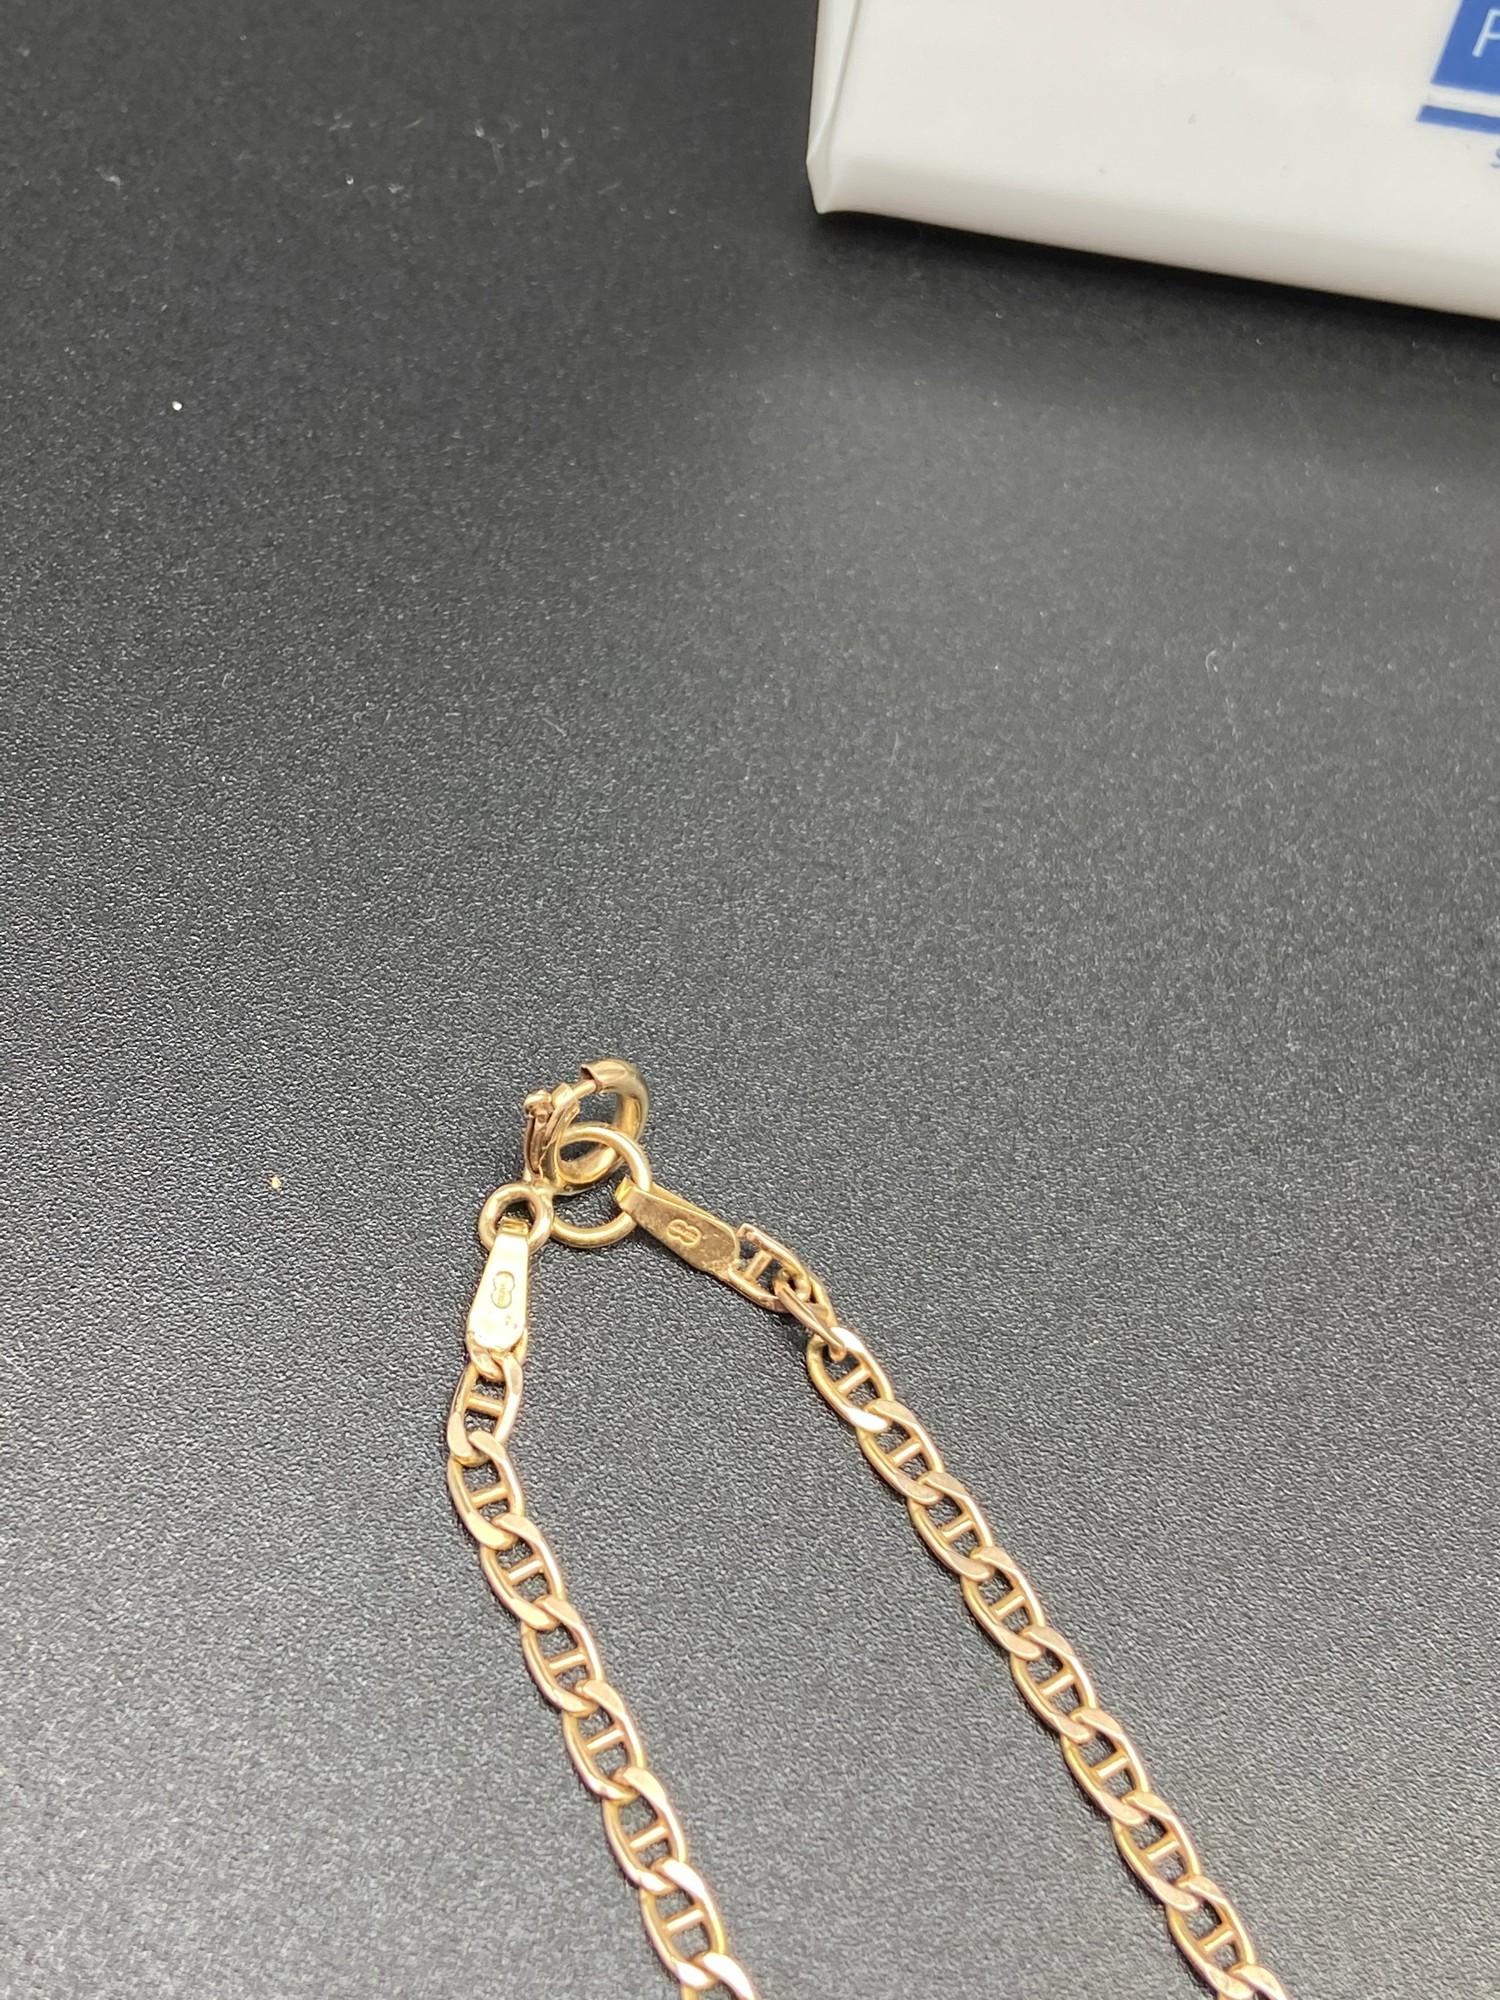 A 9ct gold curb necklace [8 Grams][48cm in Length] - Image 2 of 2